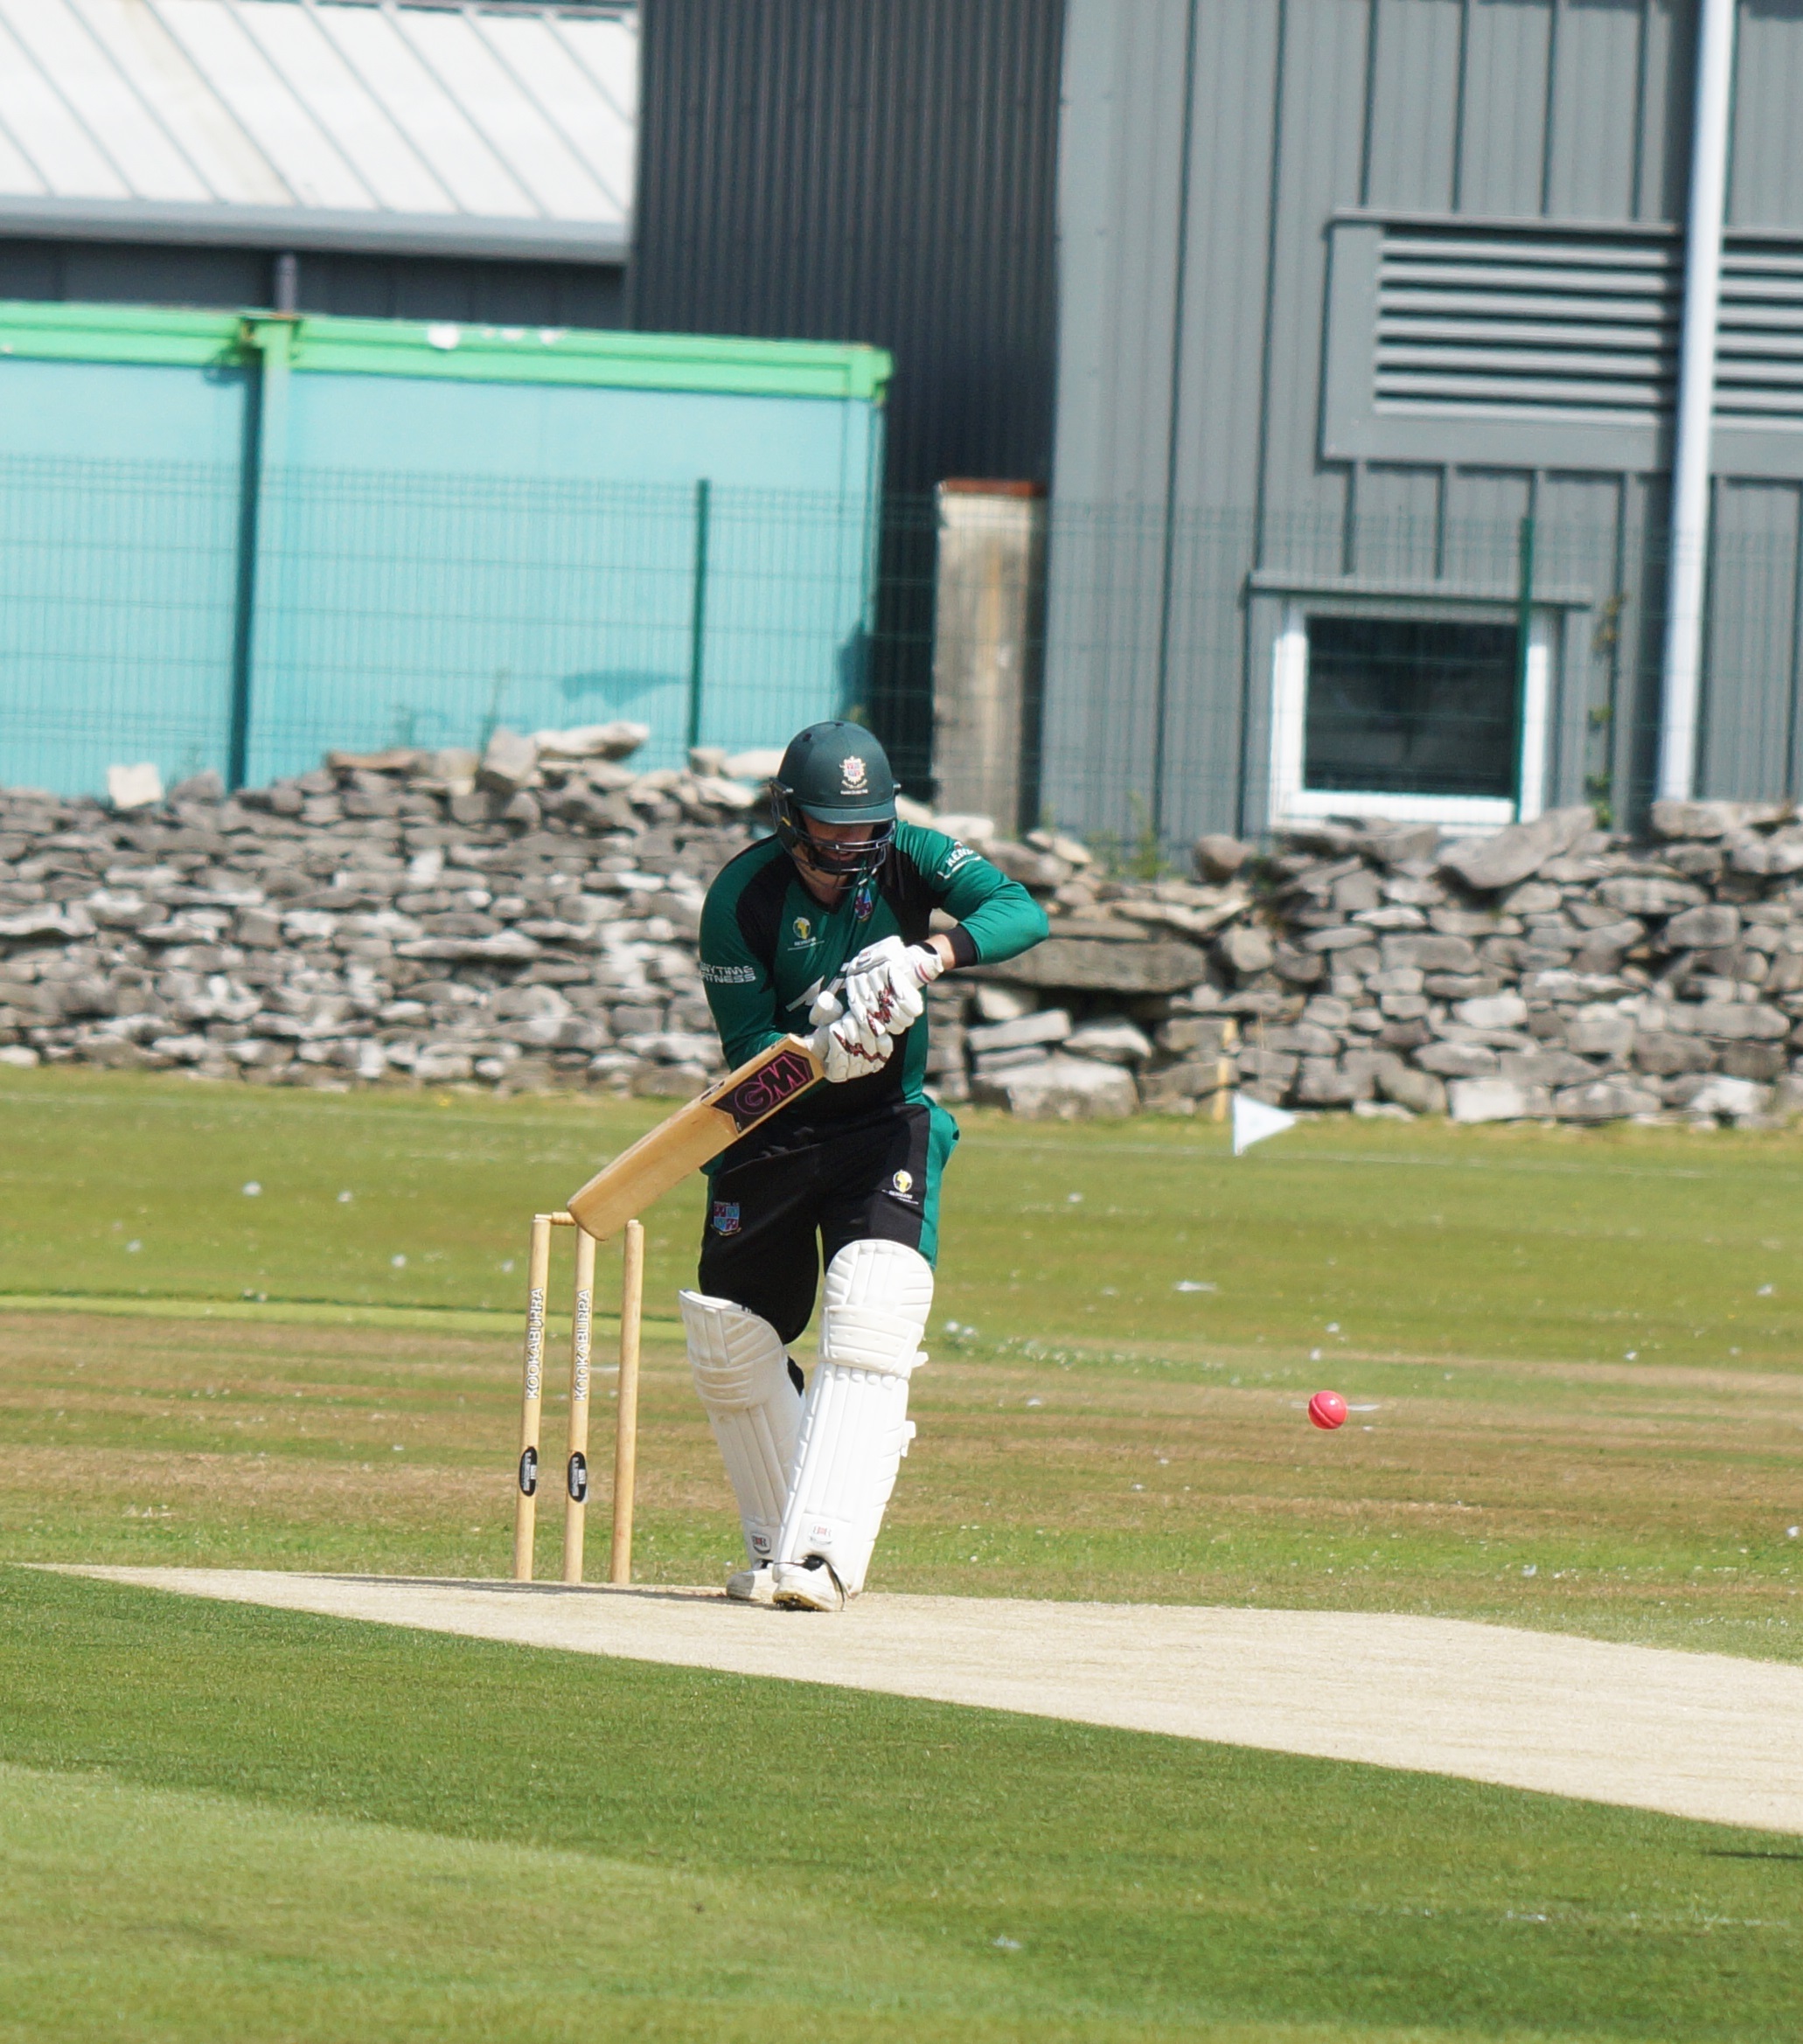 CRICKET: Chris Miller batting (Report and pictures from Richard Edmondson)